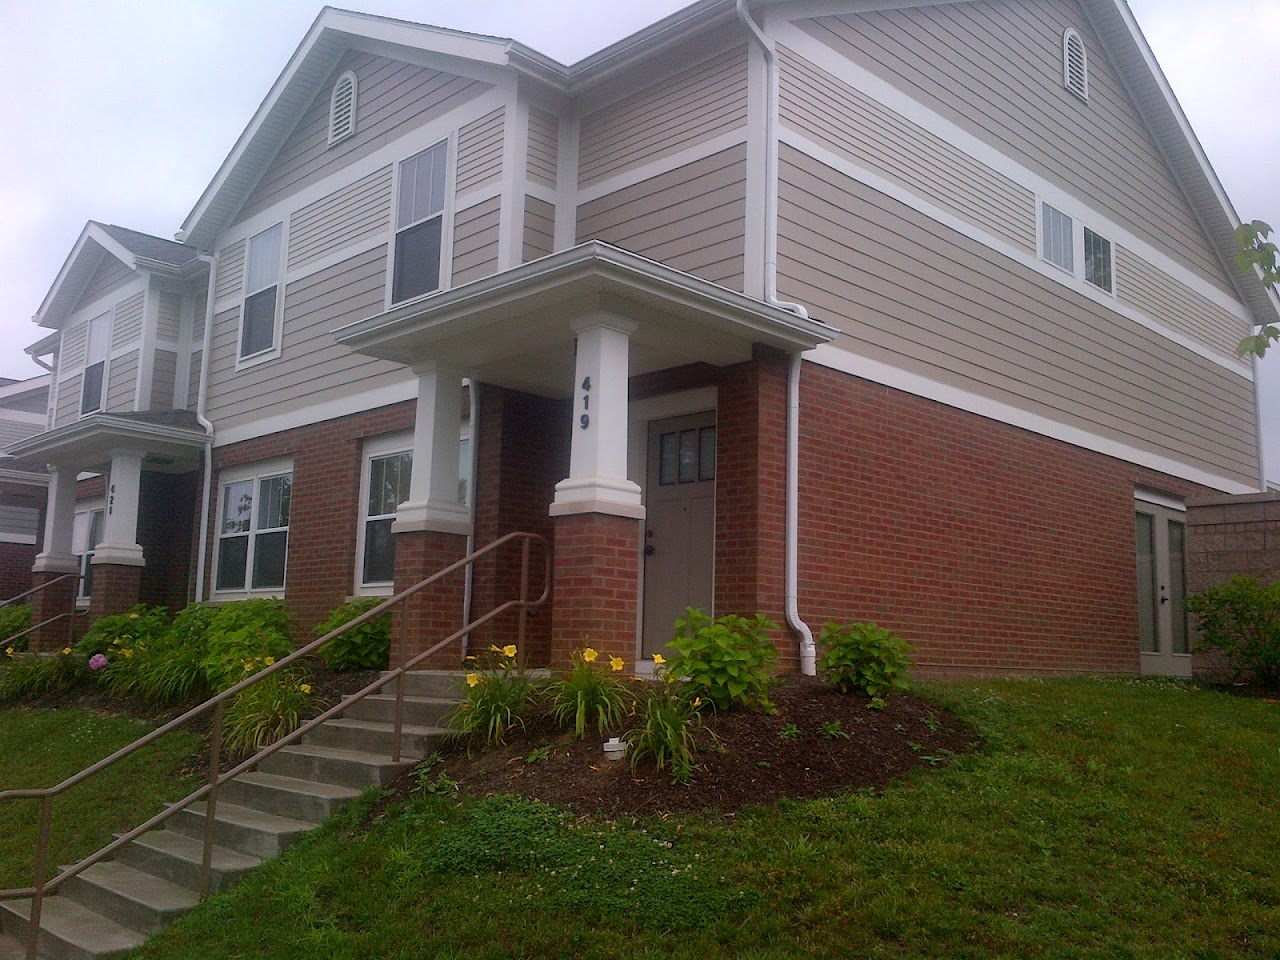 Photo of EDGEWOOD APTS PHASE I. Affordable housing located at 491 VERNON ODOM BLVD AKRON, OH 44307